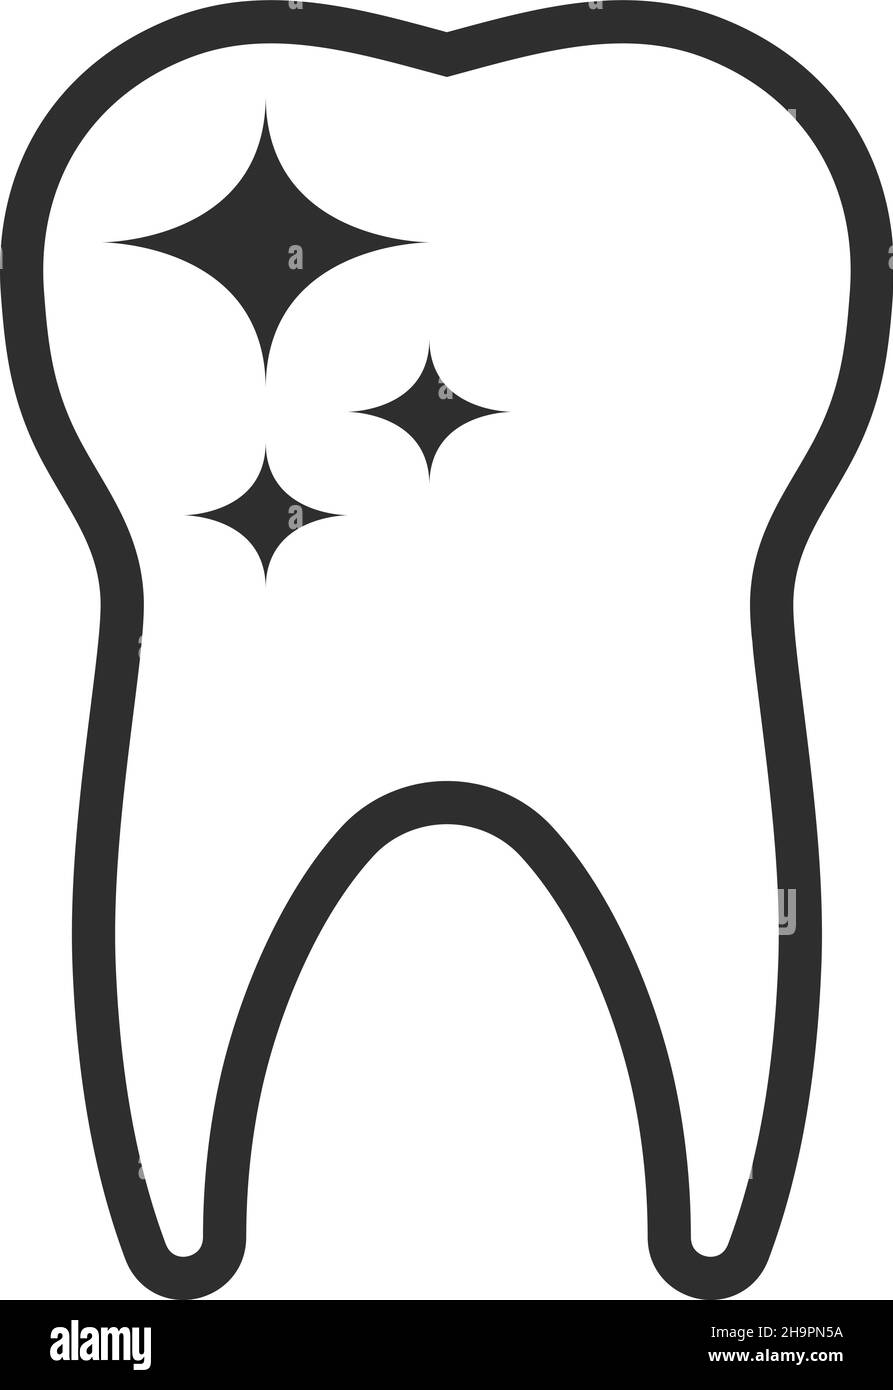 Shiny tooth icon. Healthy and clean teeth symbol Stock Vector